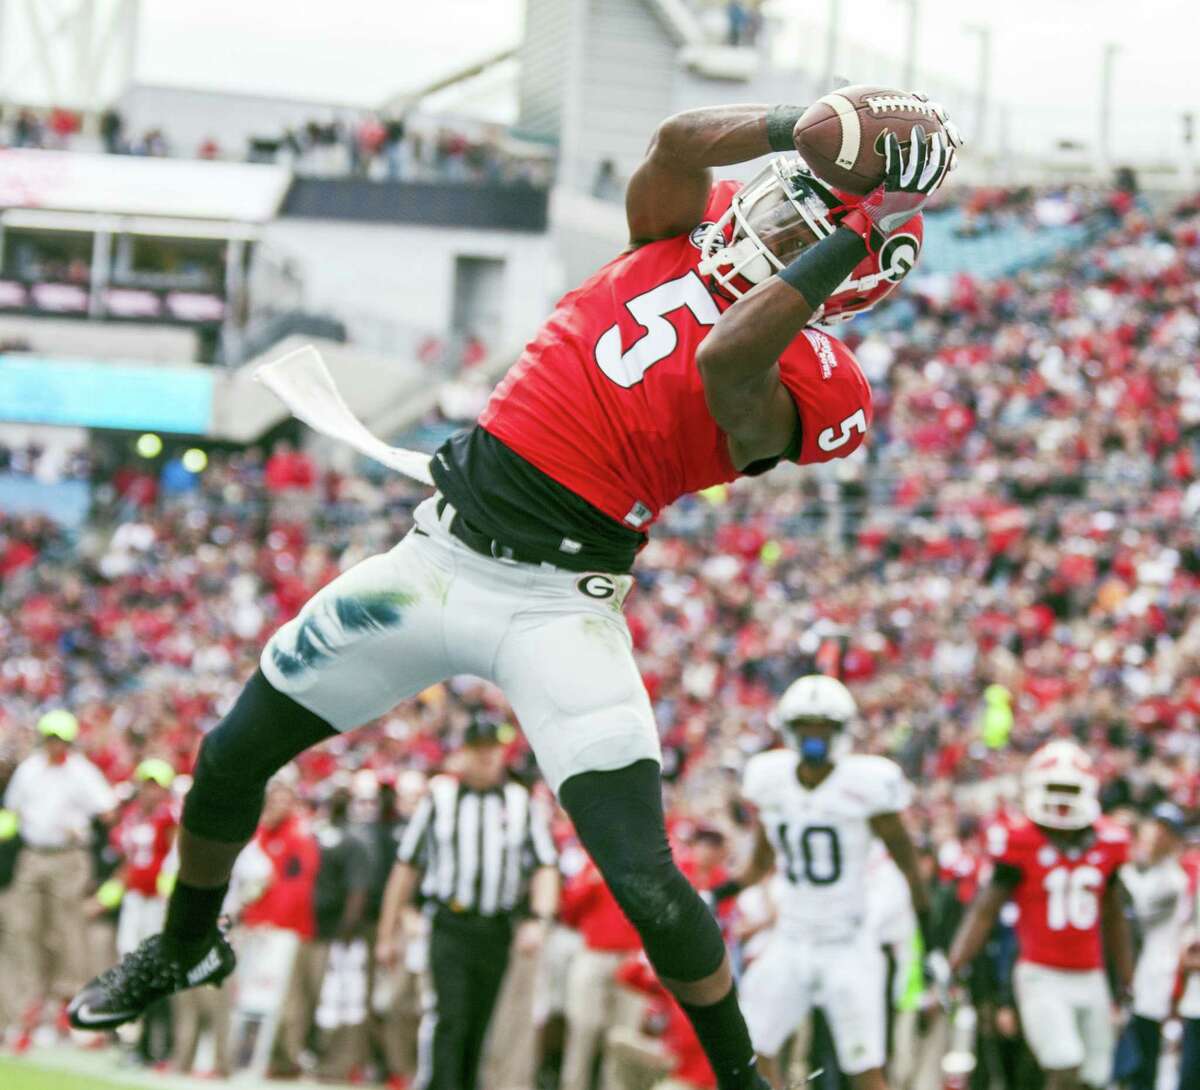 Georgia wide receiver Terry Godwin catches a touchdown during the first half of the TaxSlayer Bowl against Penn State on Saturday in Jacksonville, Fla.